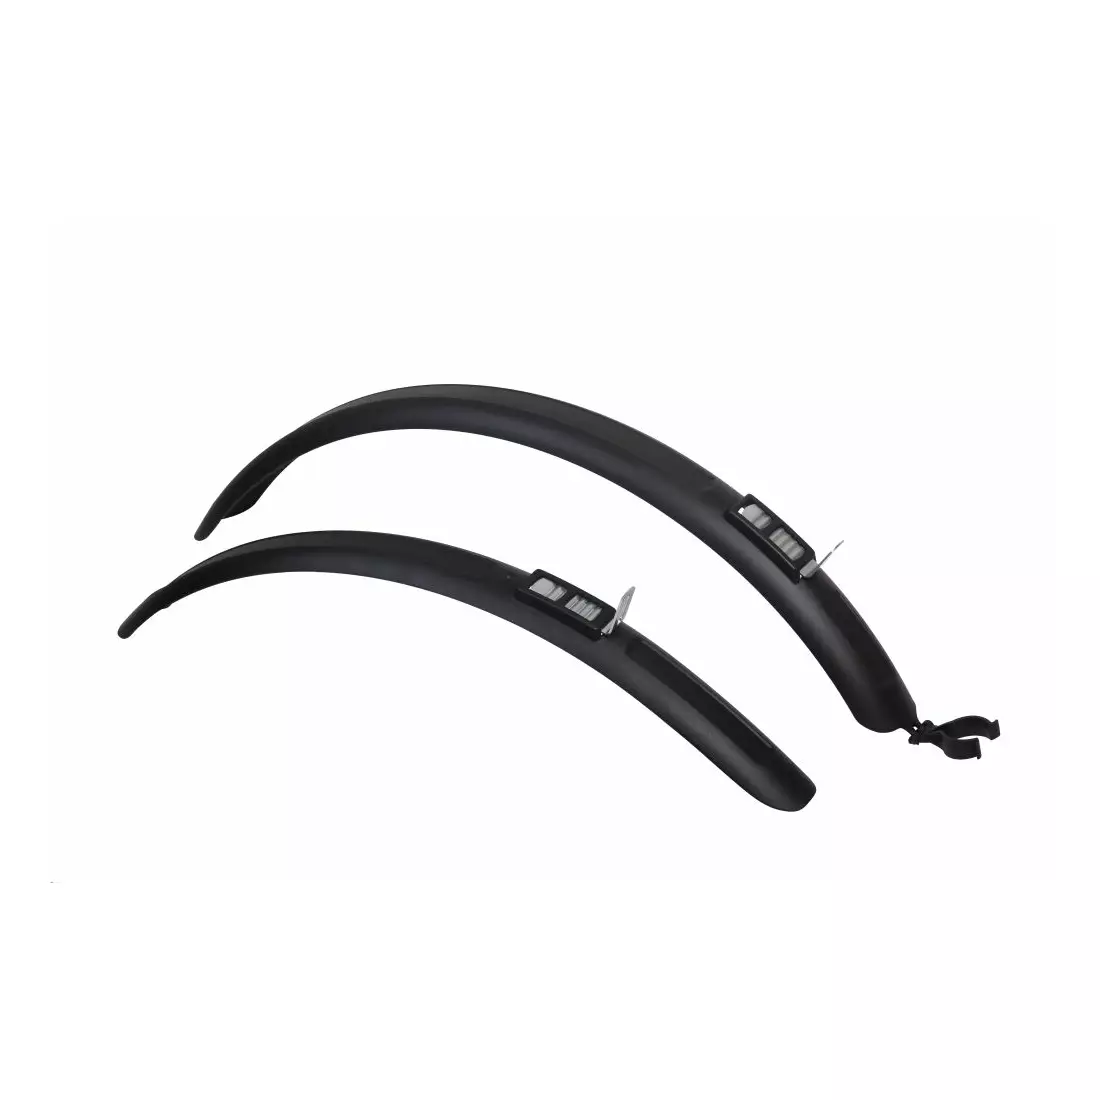 ZEFAL set of bicycle mudguards trial 55 black ZF-2435